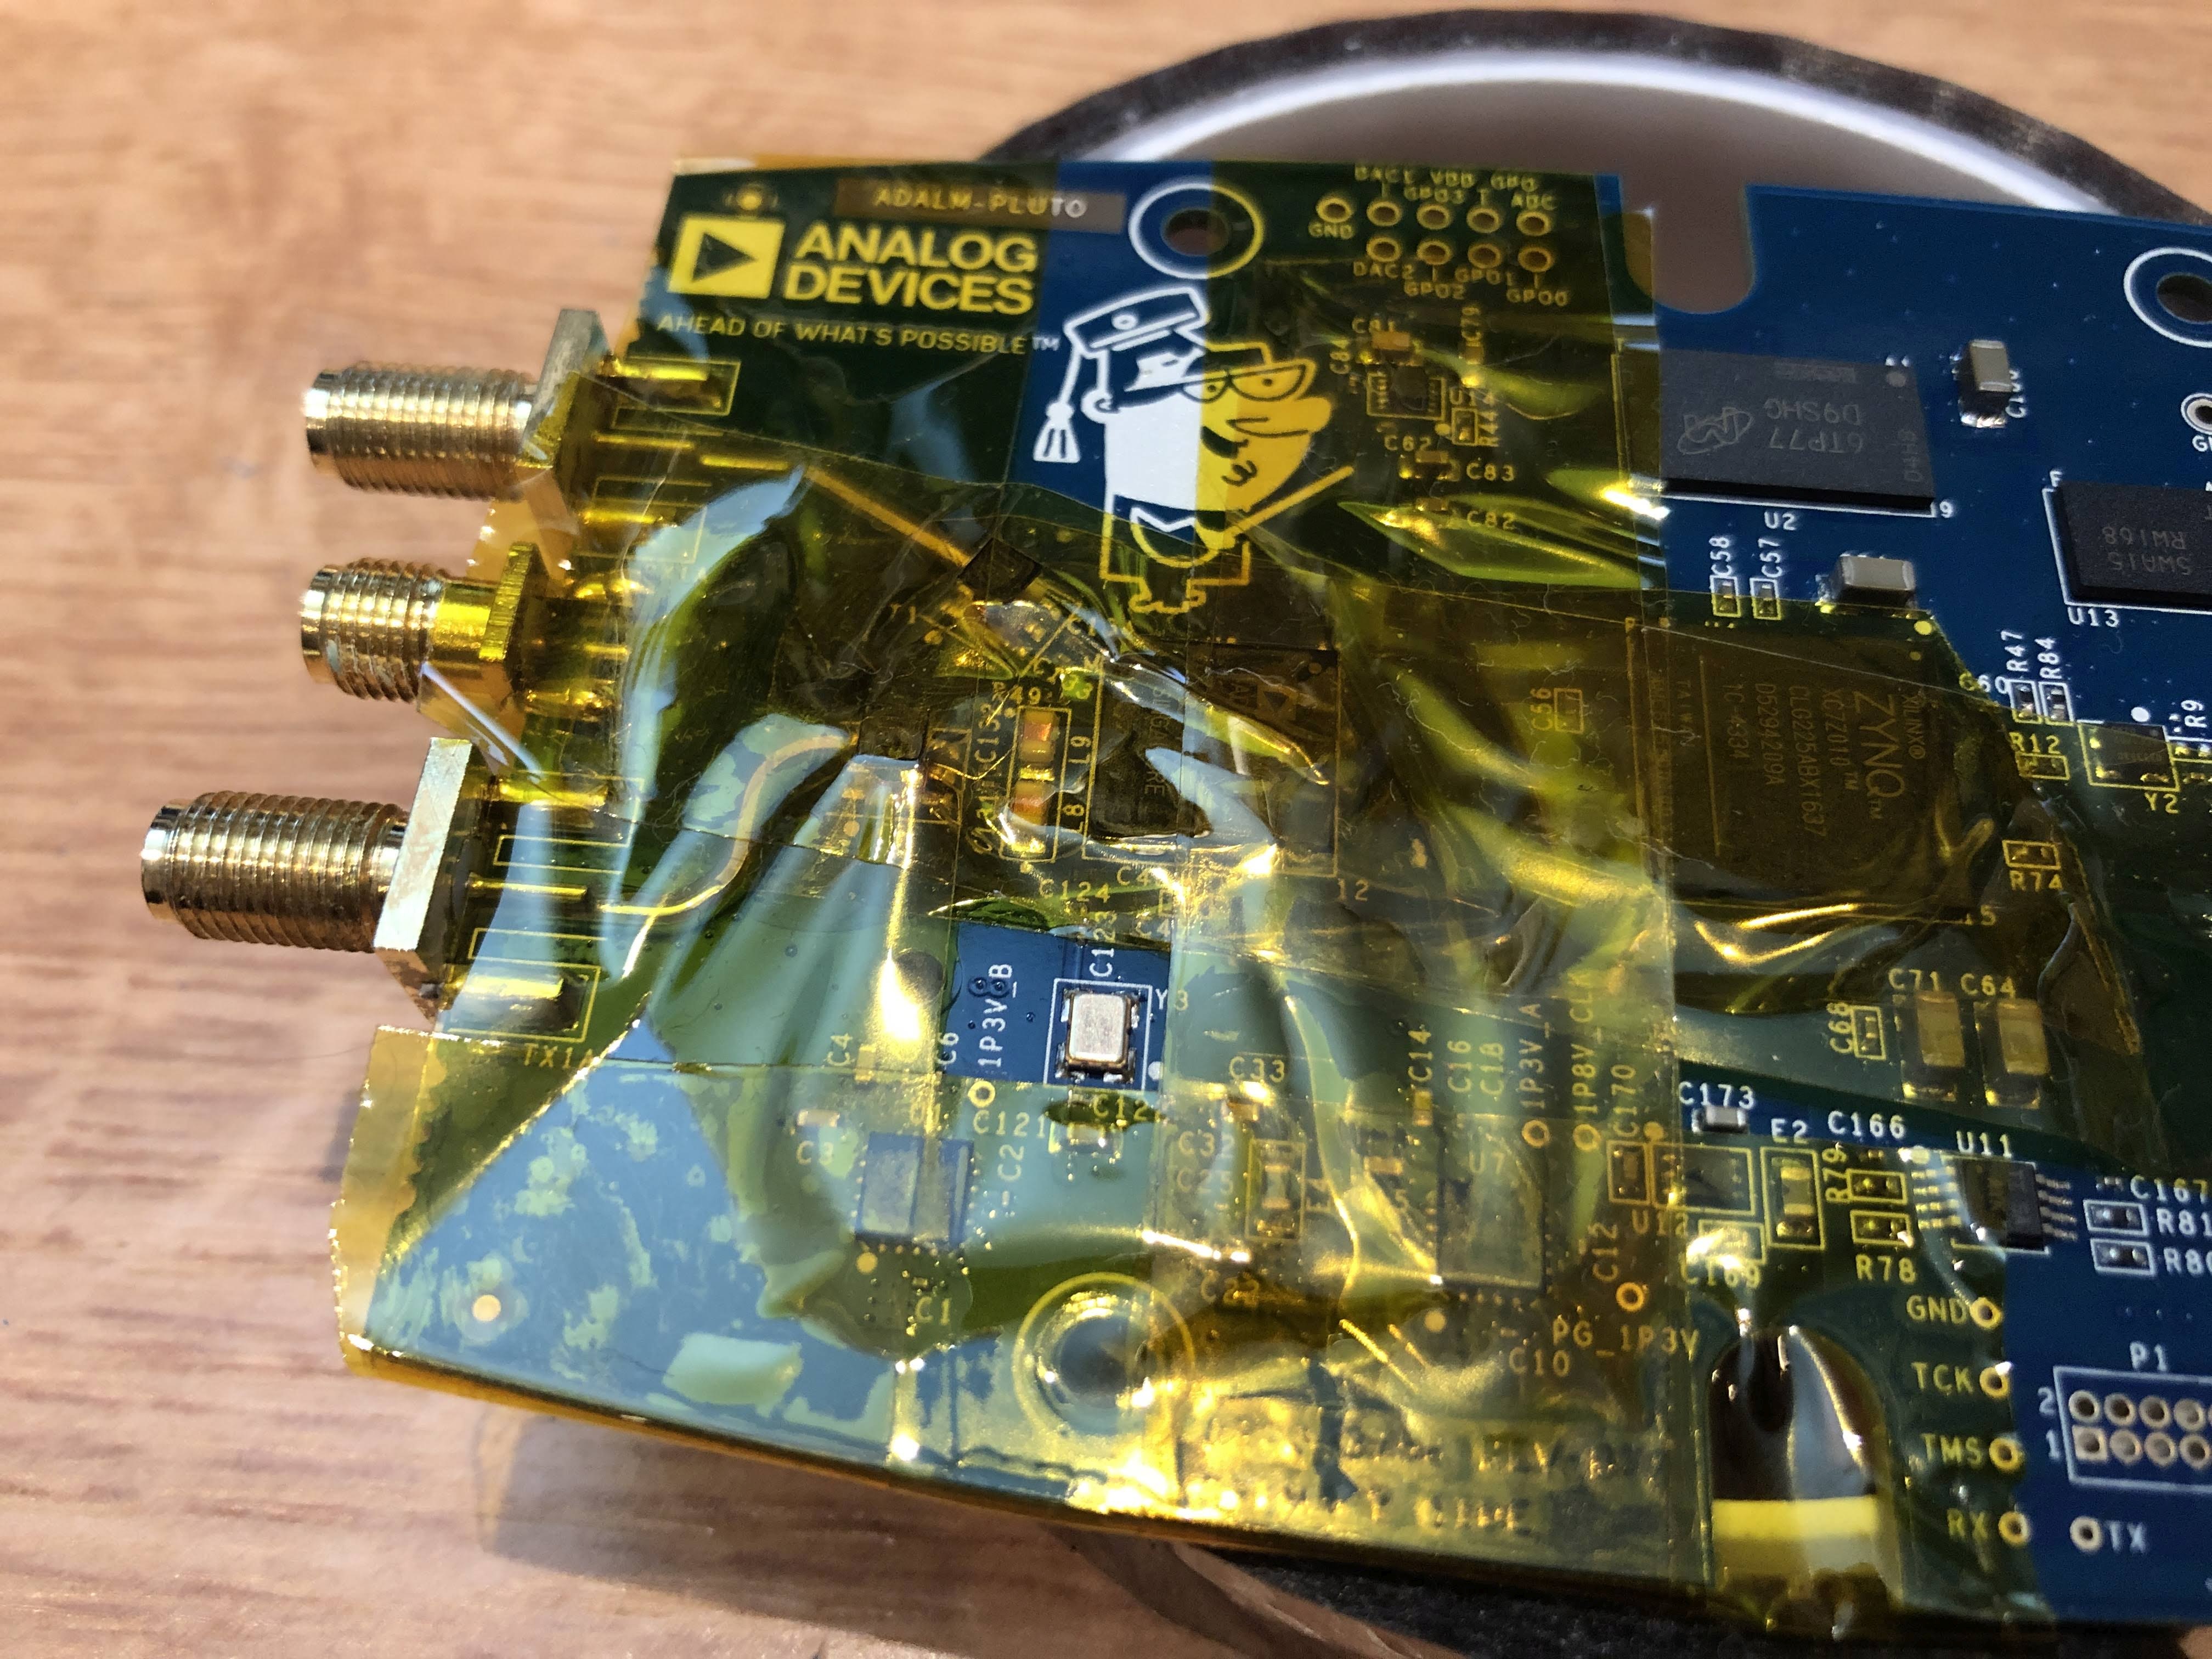 PlutoSDR PCB, most parts masked off with Kapton tape, except for the crystal oscillator